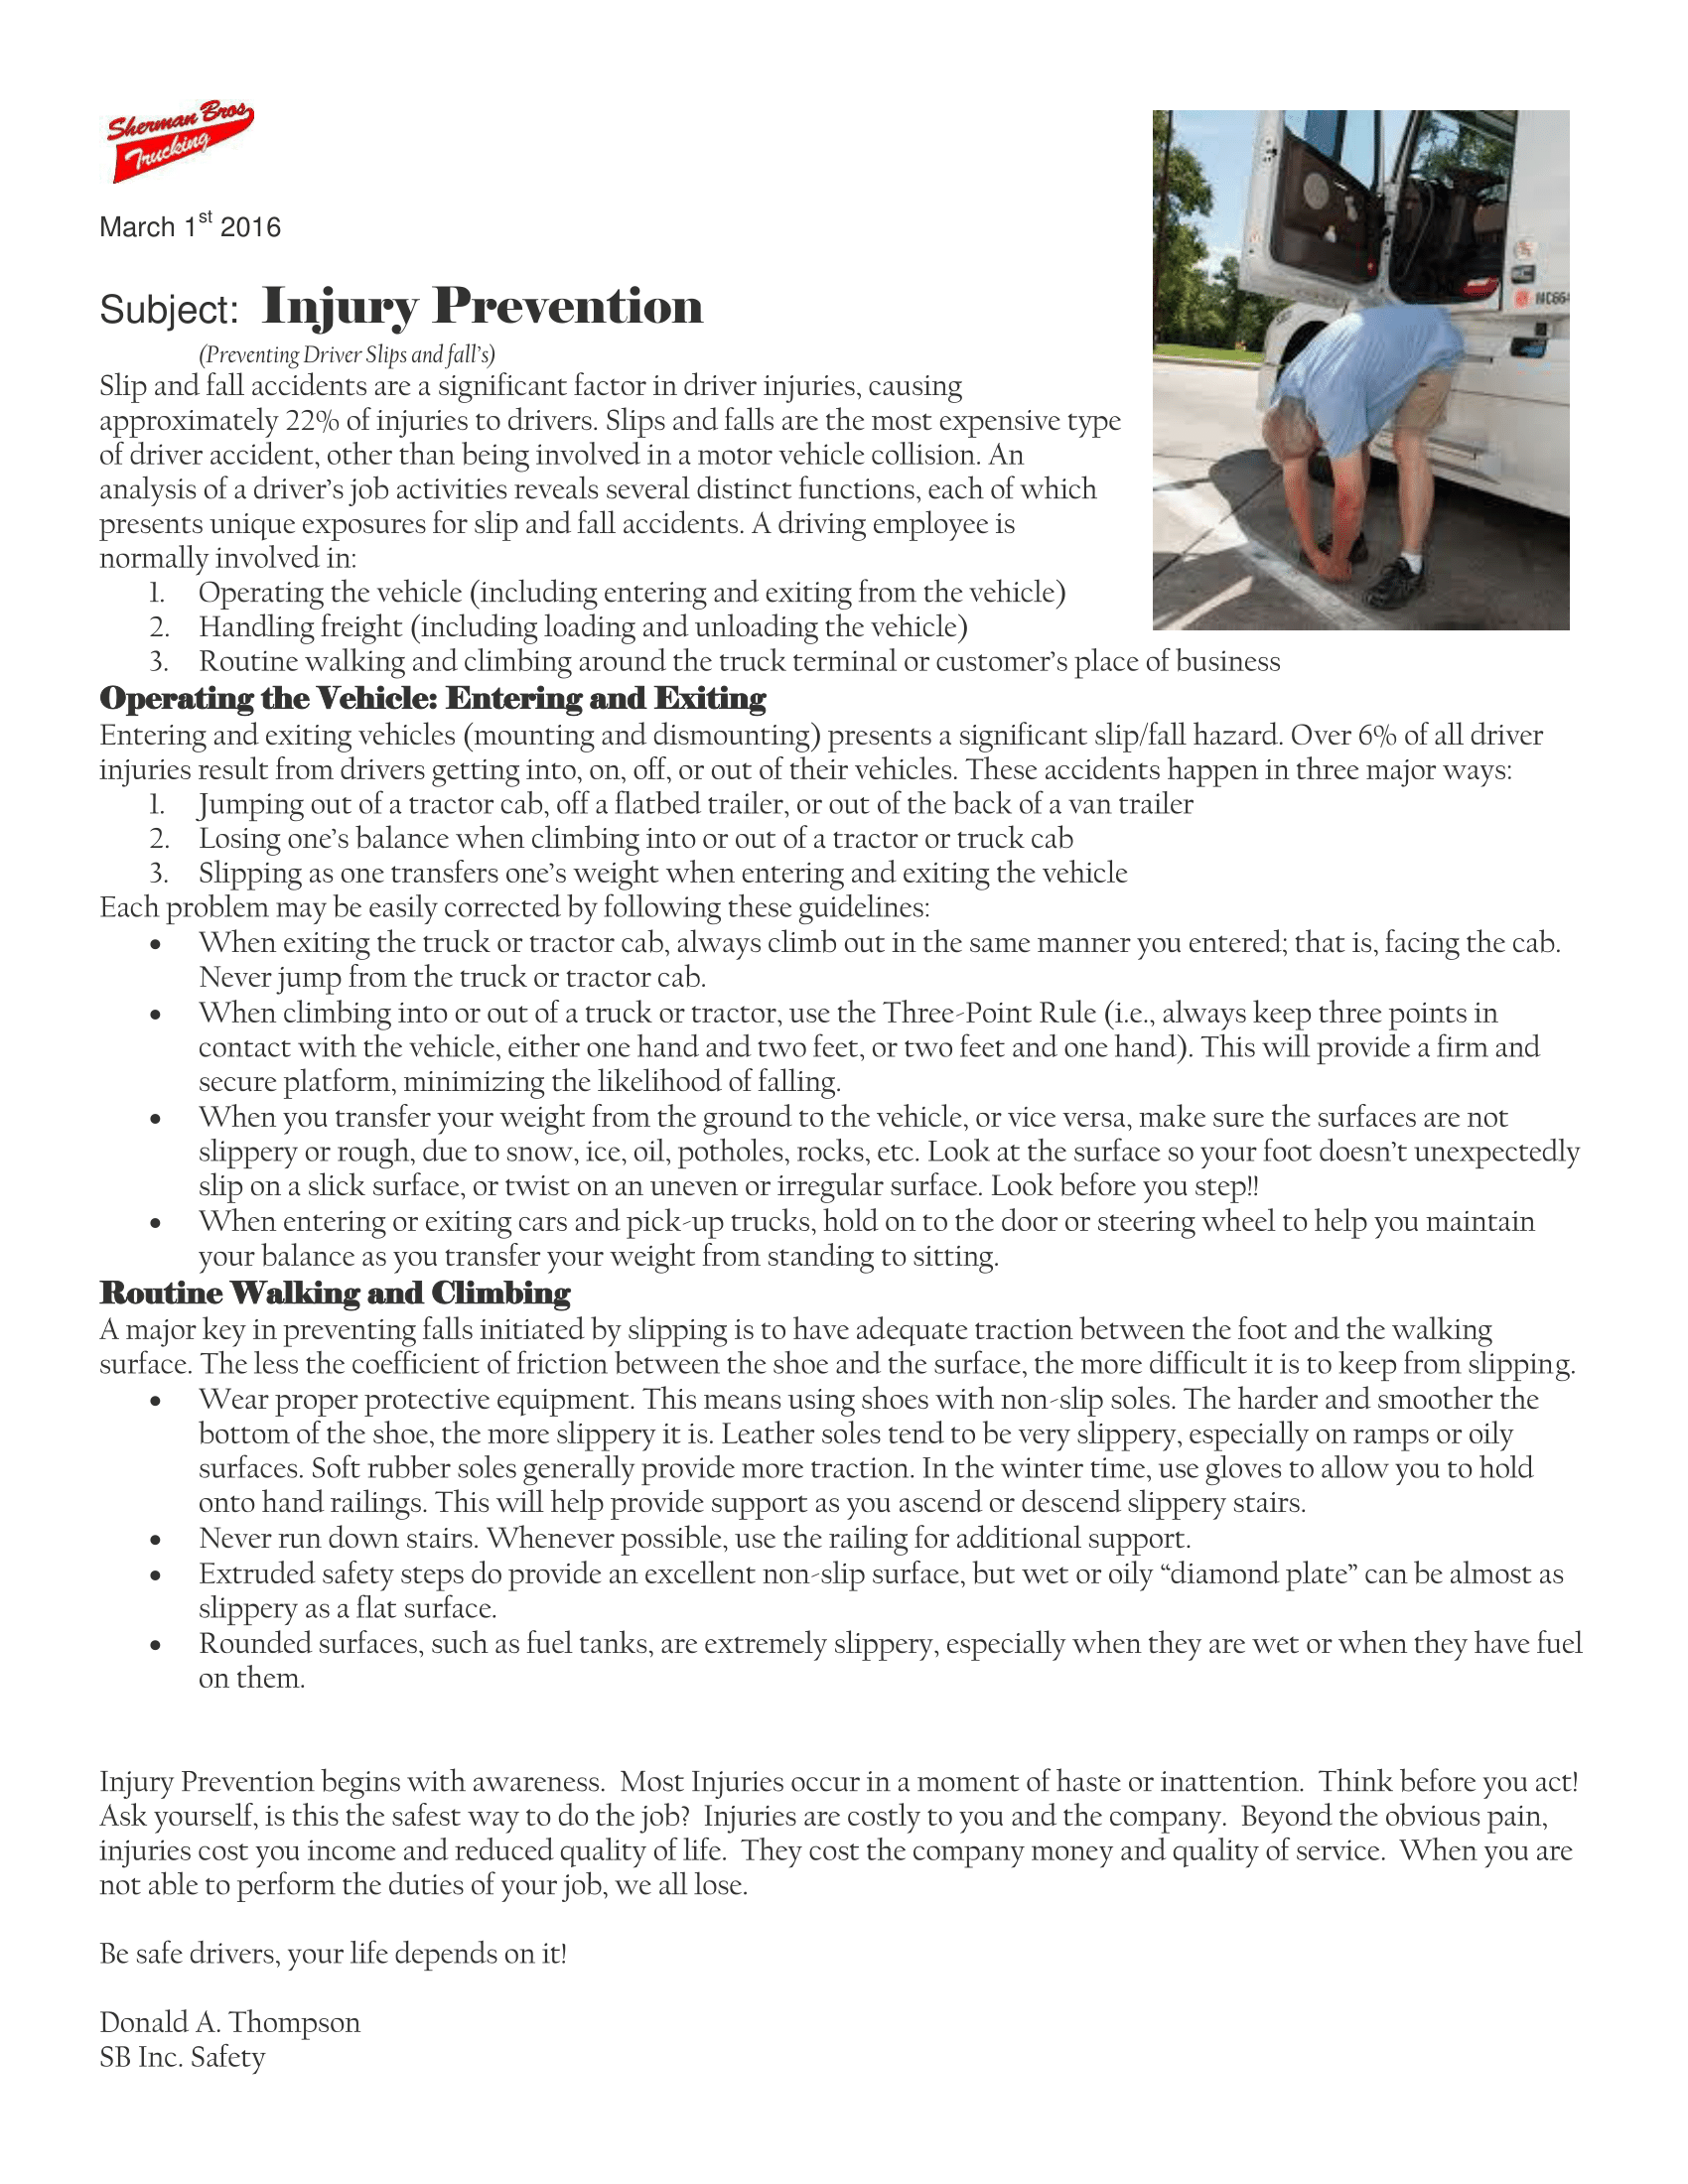 Mar - Injury Prevention March 2016-1.png